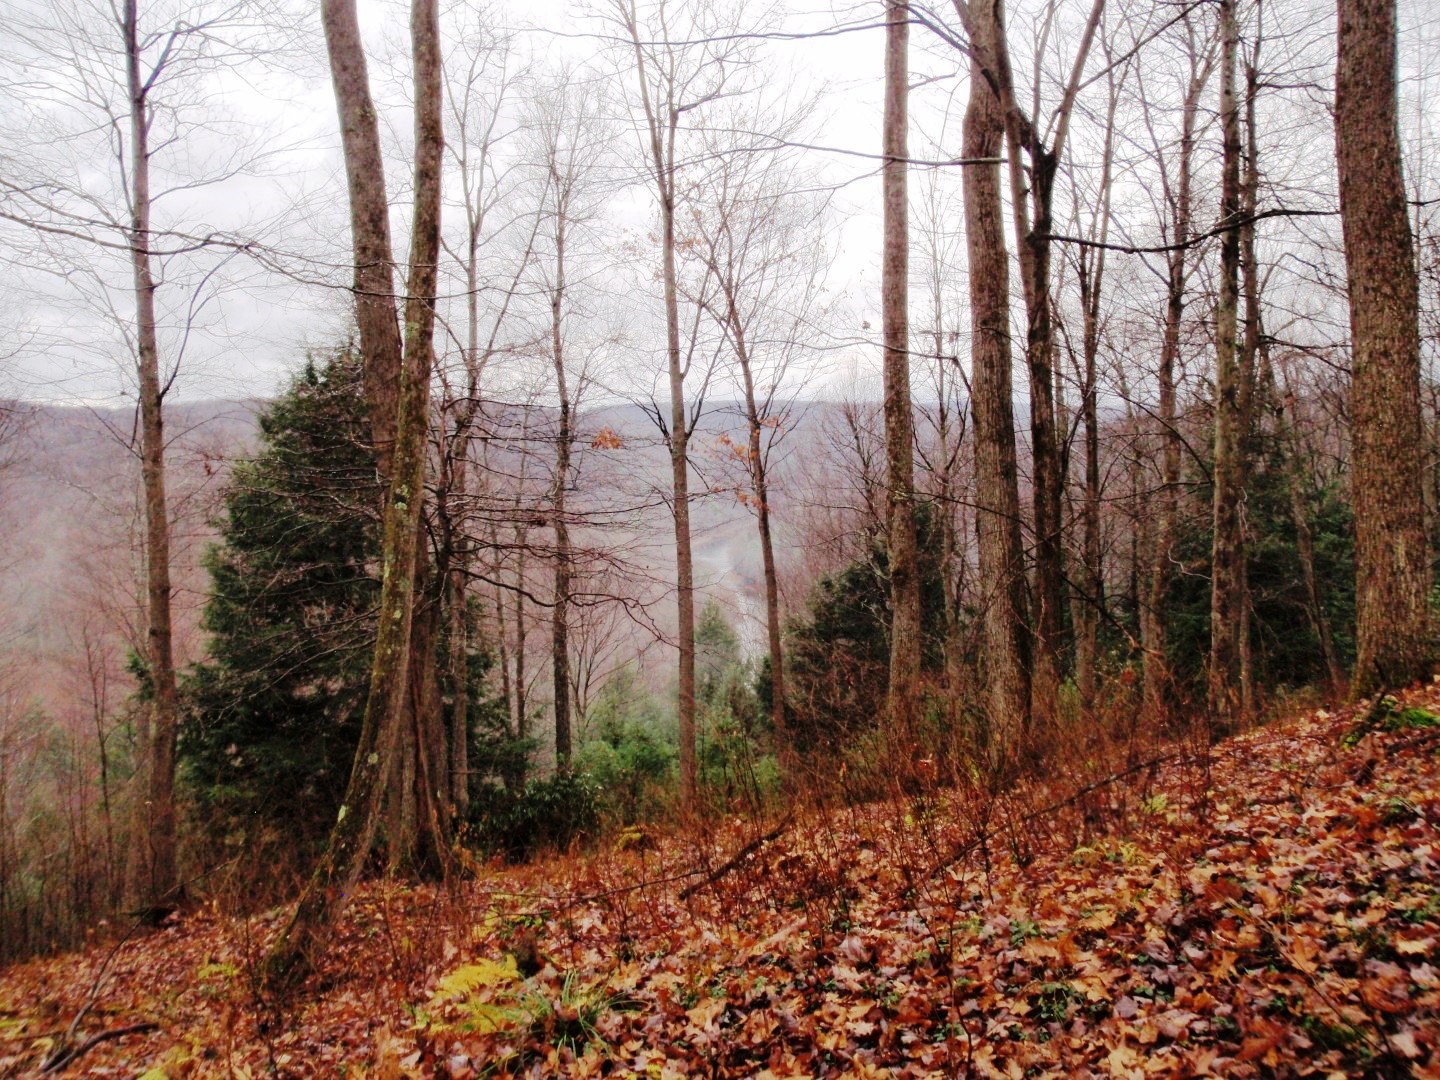 A view from a sloping hillside offer a view across a misty valley through bare trees. The ground below is covered in colorful fallen leaves in red yellow and orange.